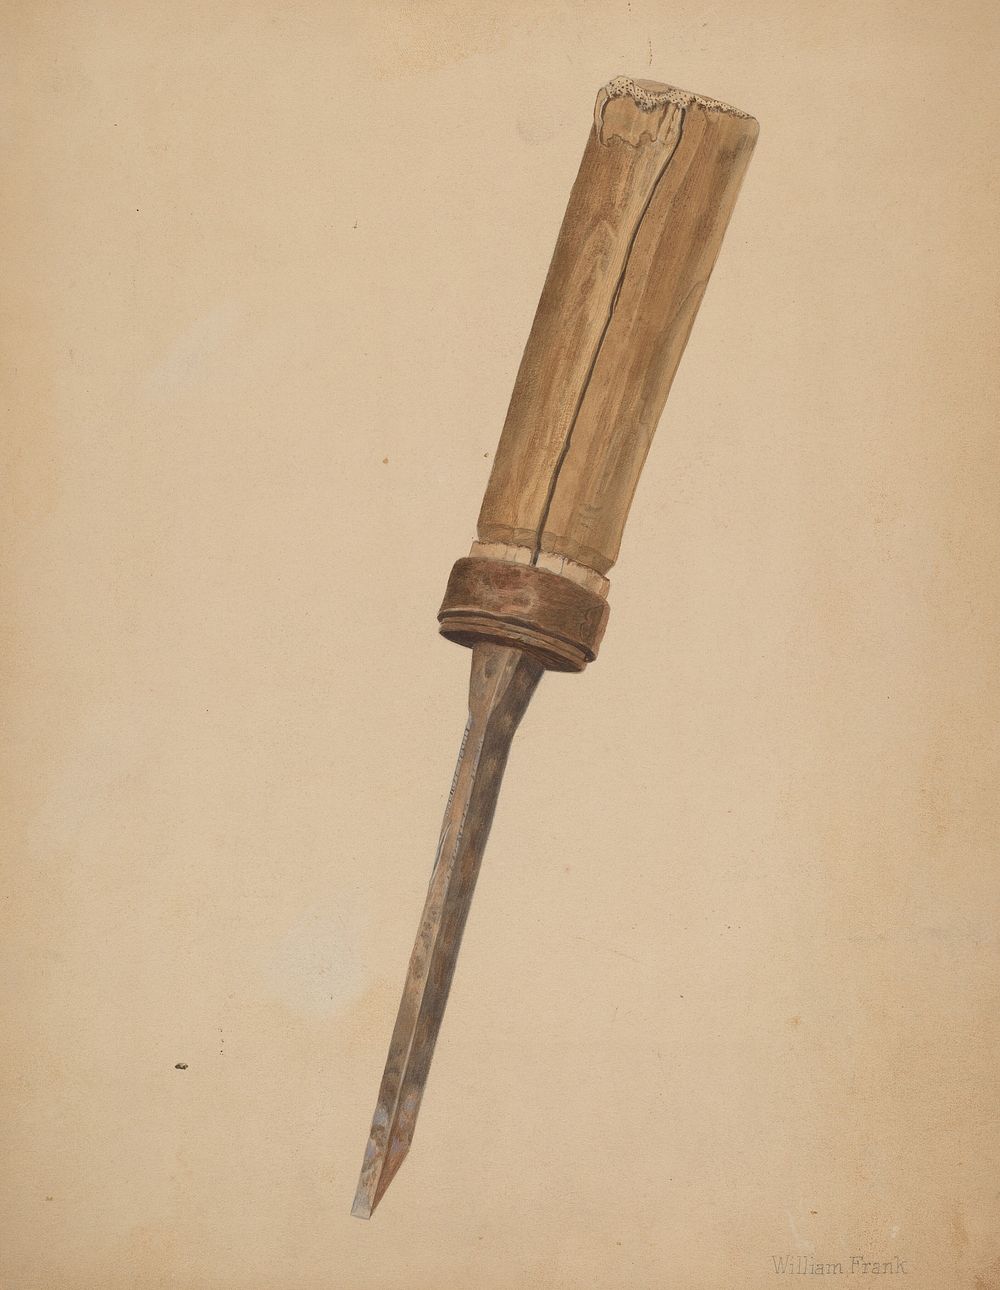 Wagon Maker's Chisel (ca.1942) by William Frank.  